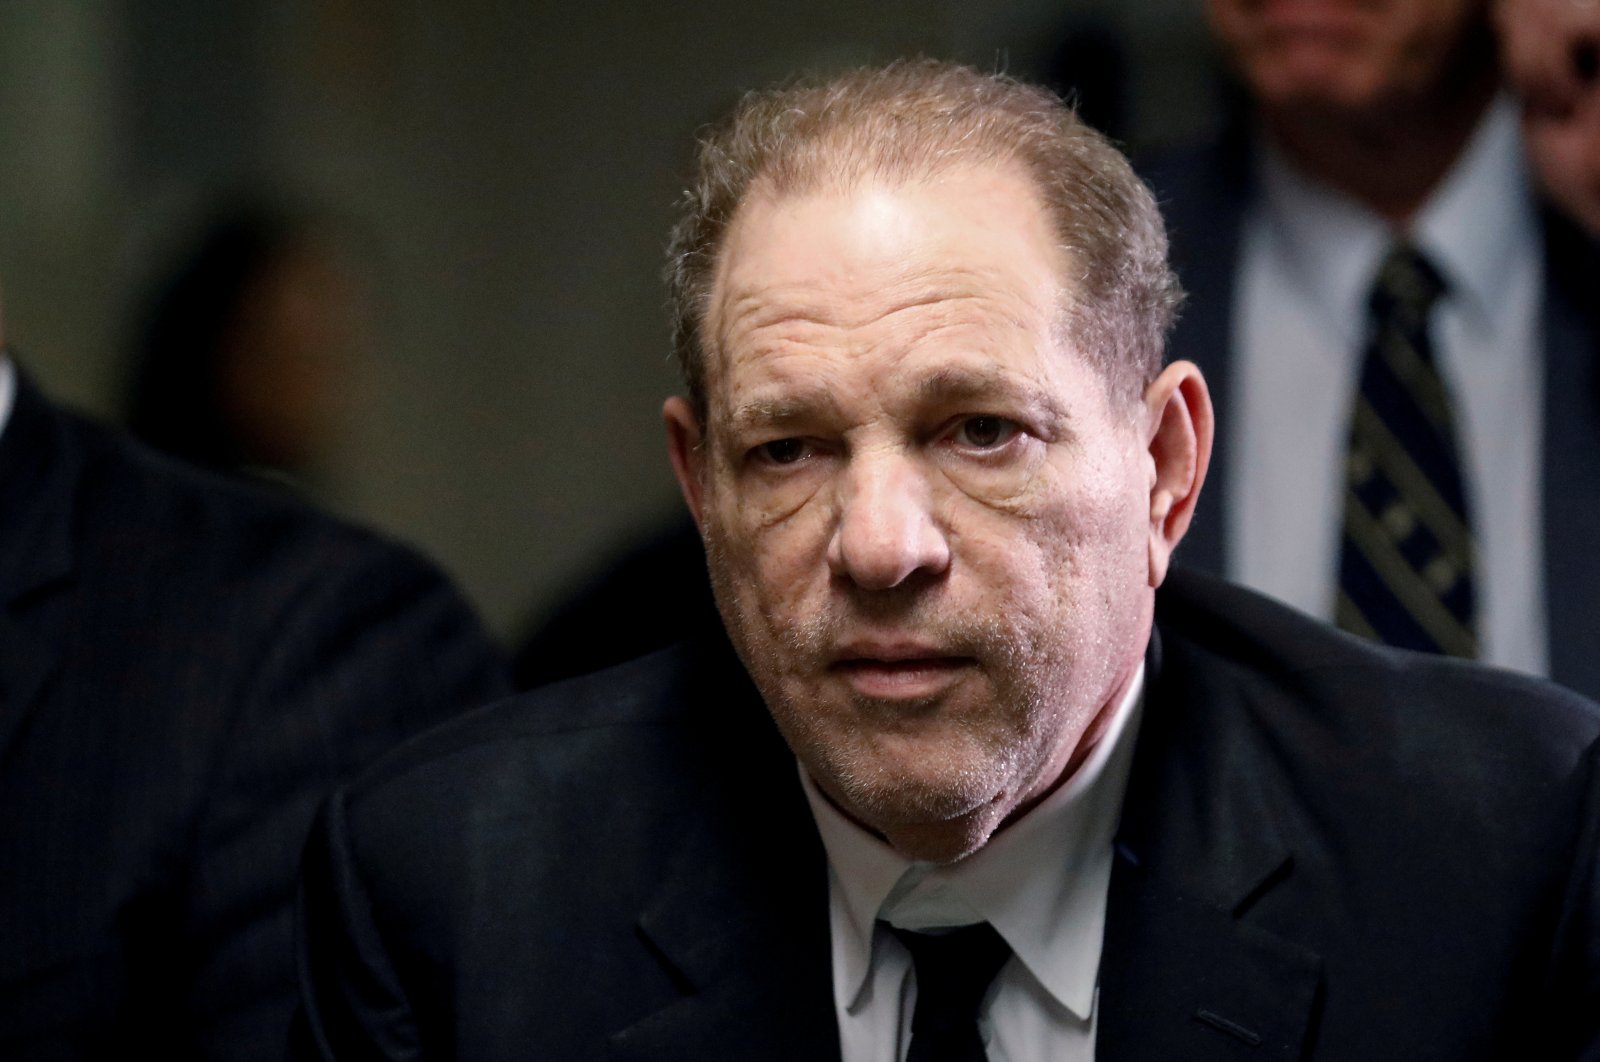 Film producer Harvey Weinstein departs Criminal Court on the first day of a sexual assault trial in the Manhattan borough of New York City, New York, U.S., Jan. 6, 2020. (REUTERS Photo)